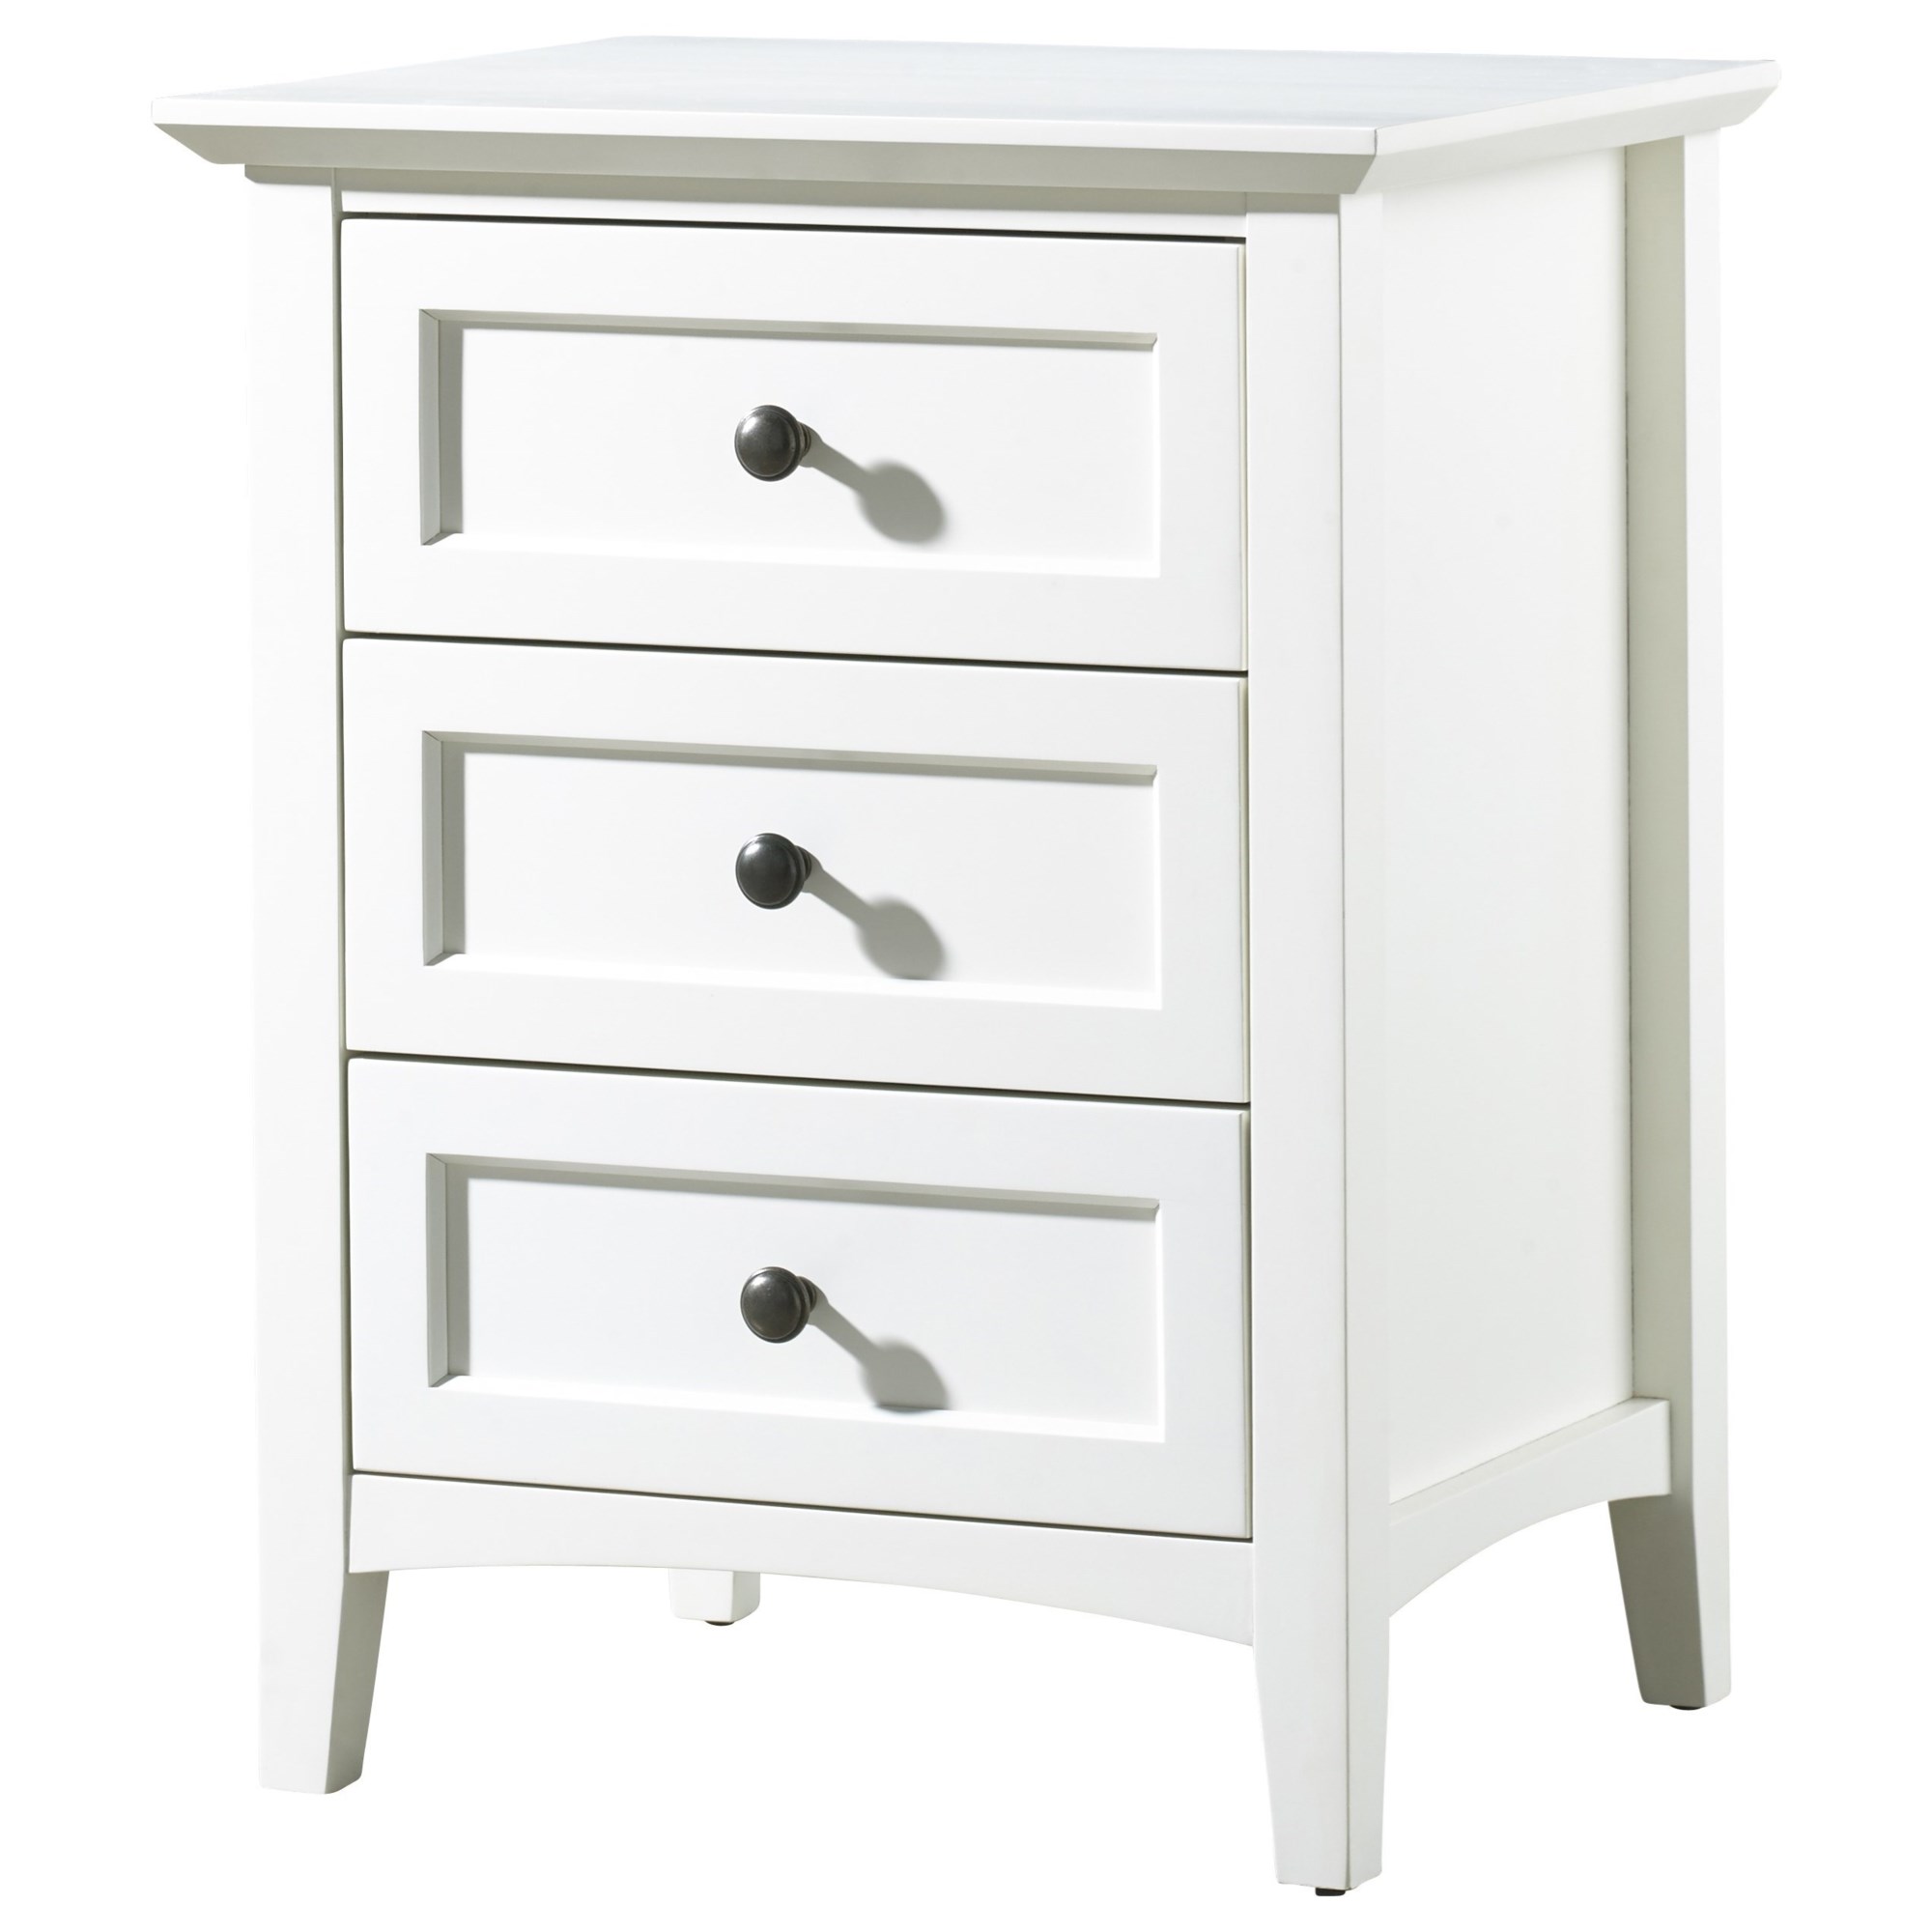 Modus International Paragon 4NA482 Shaker Style 8-Drawer Dresser Made from  Solid Mahogany, A1 Furniture & Mattress